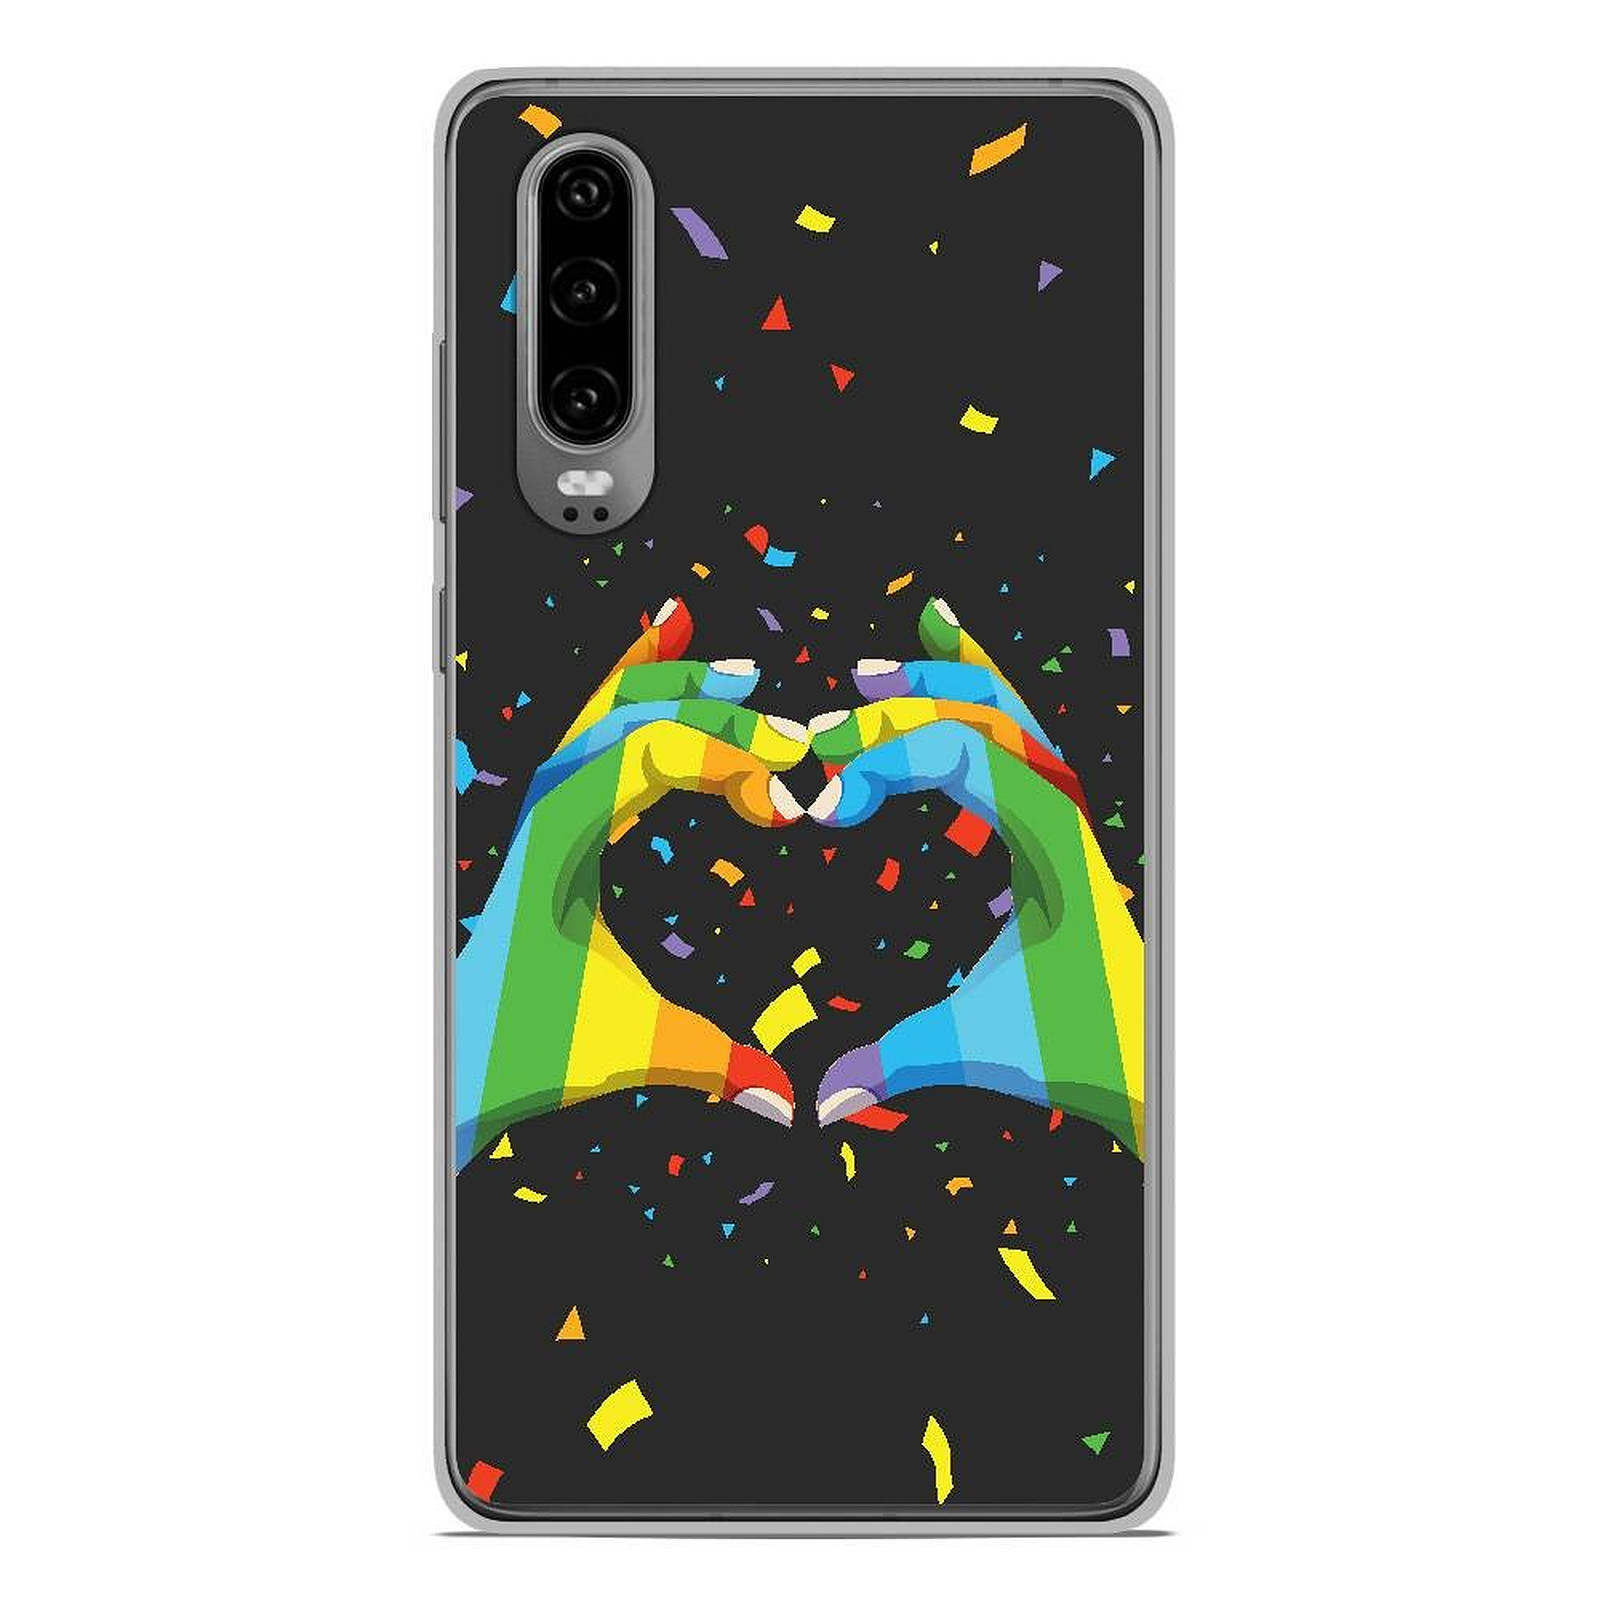 1001 Coques Coque silicone gel Huawei P30 motif LGBT - Coque telephone 1001Coques